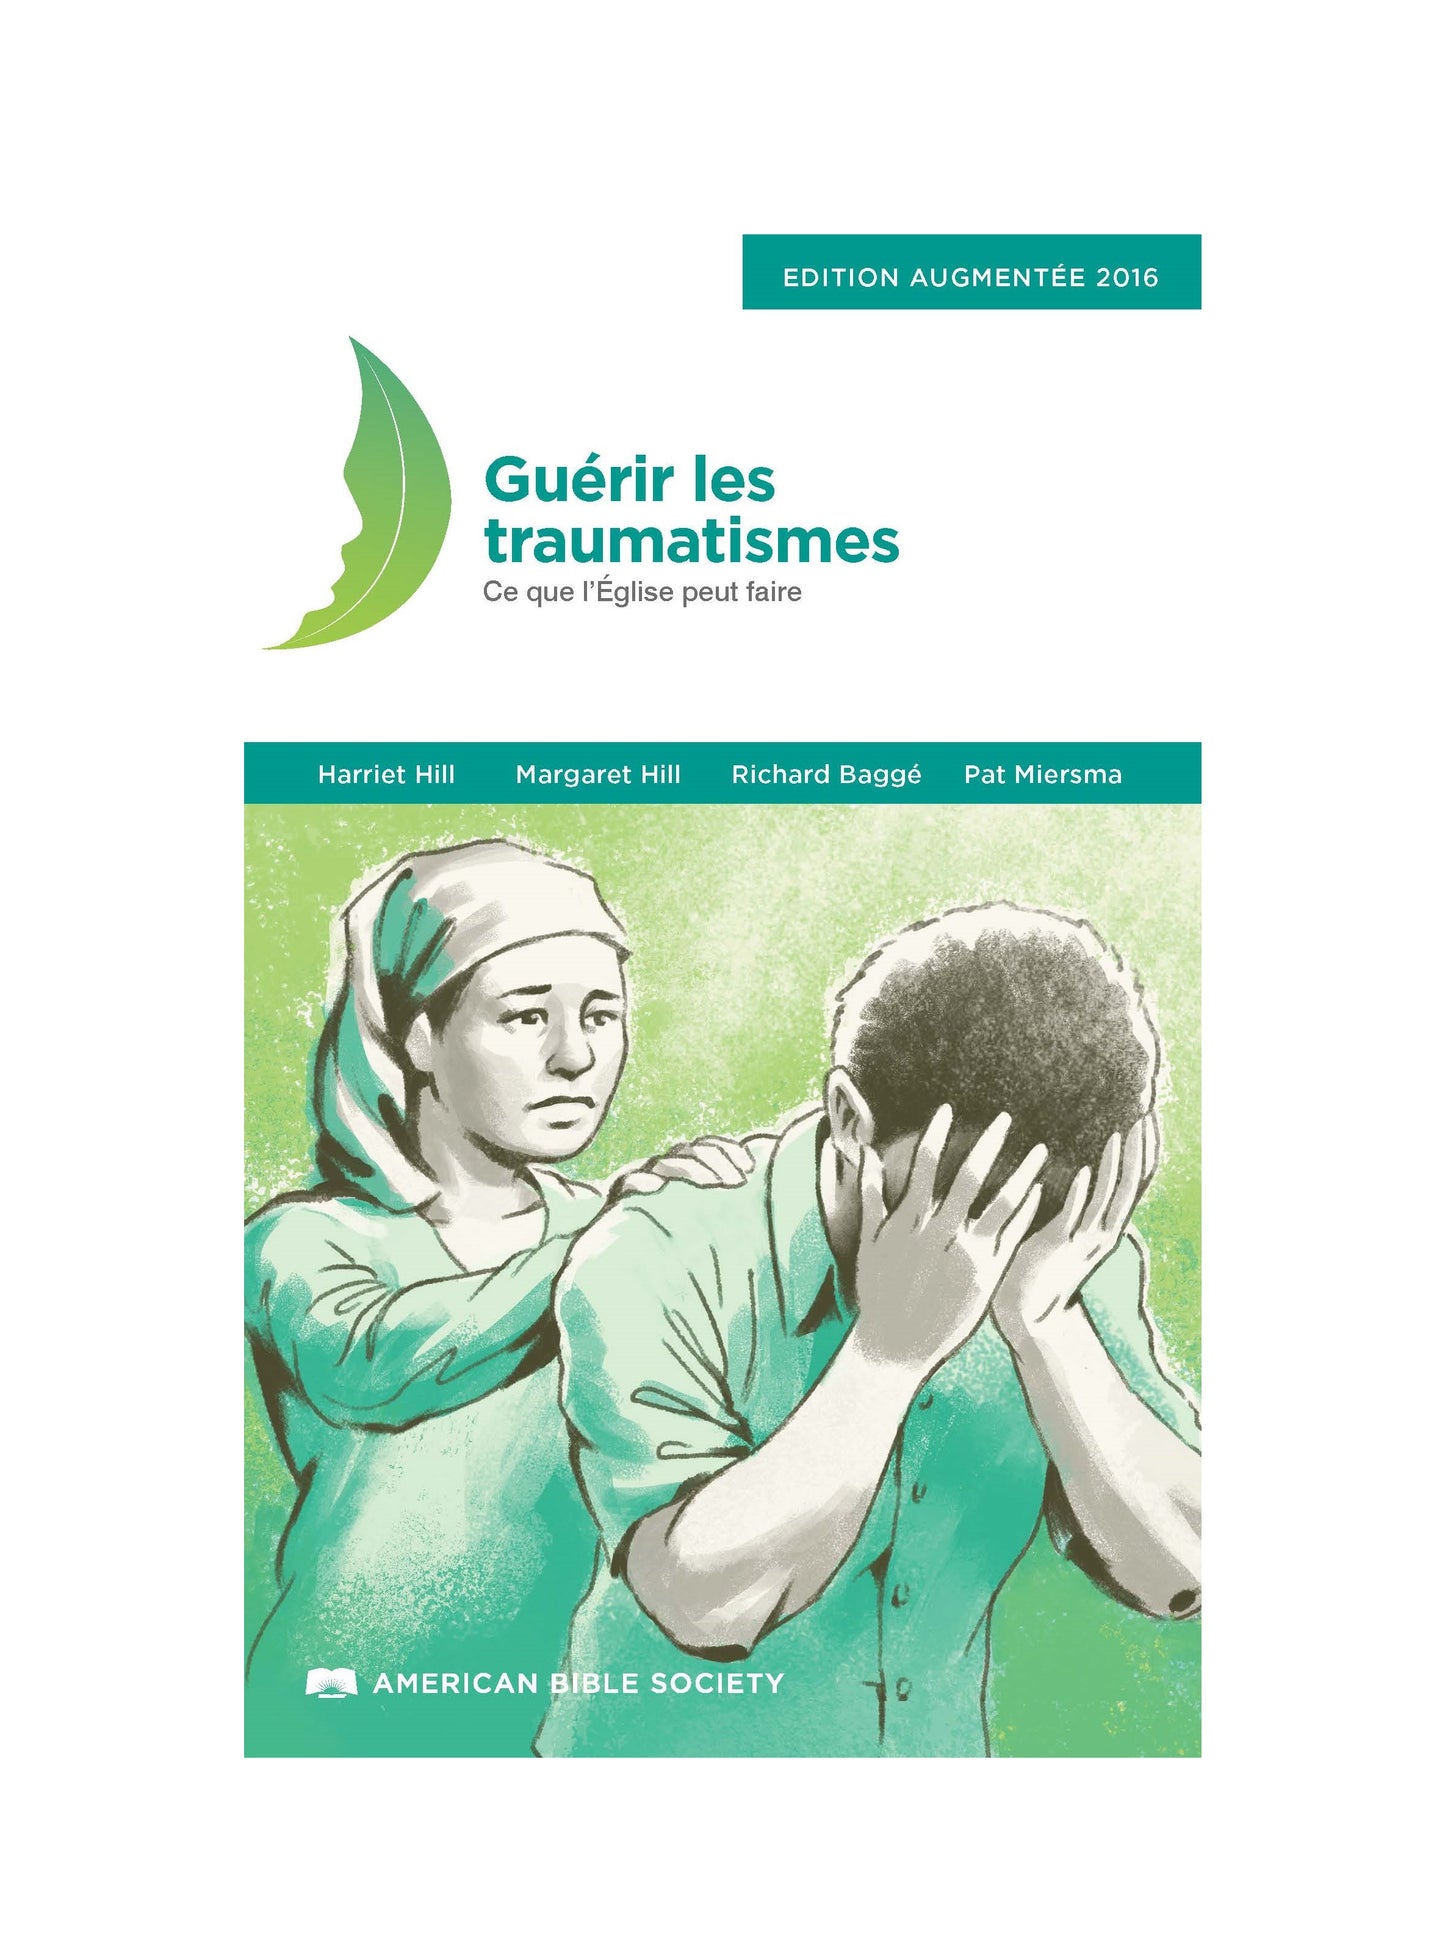 French Healing the Wounds of Trauma: How the Church Can Help